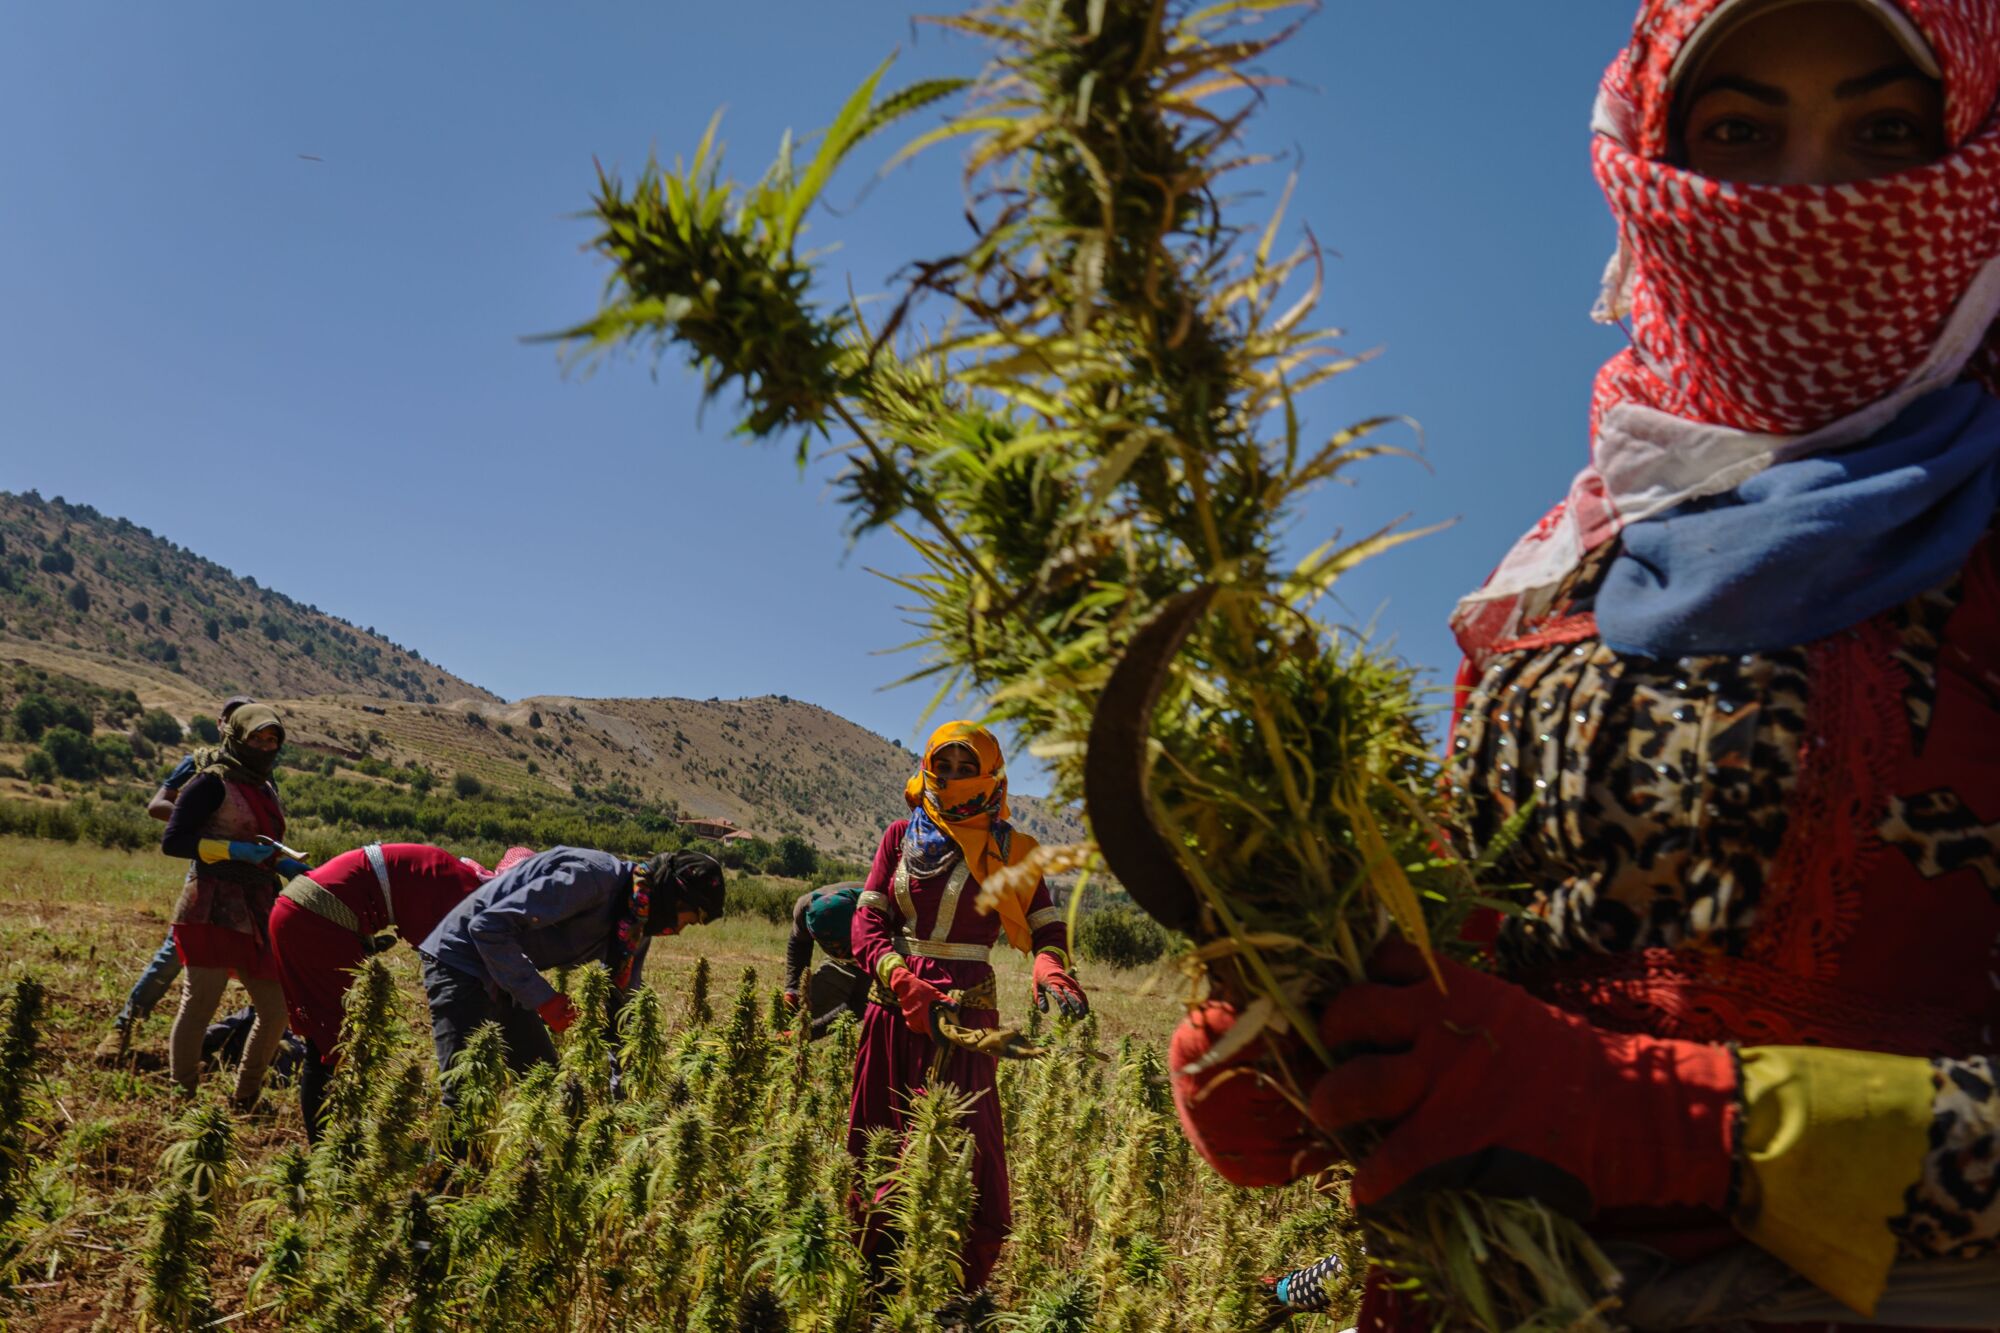 Armed with sickles, farmworkers harvest cannabis in Yammouneh, Lebanon.